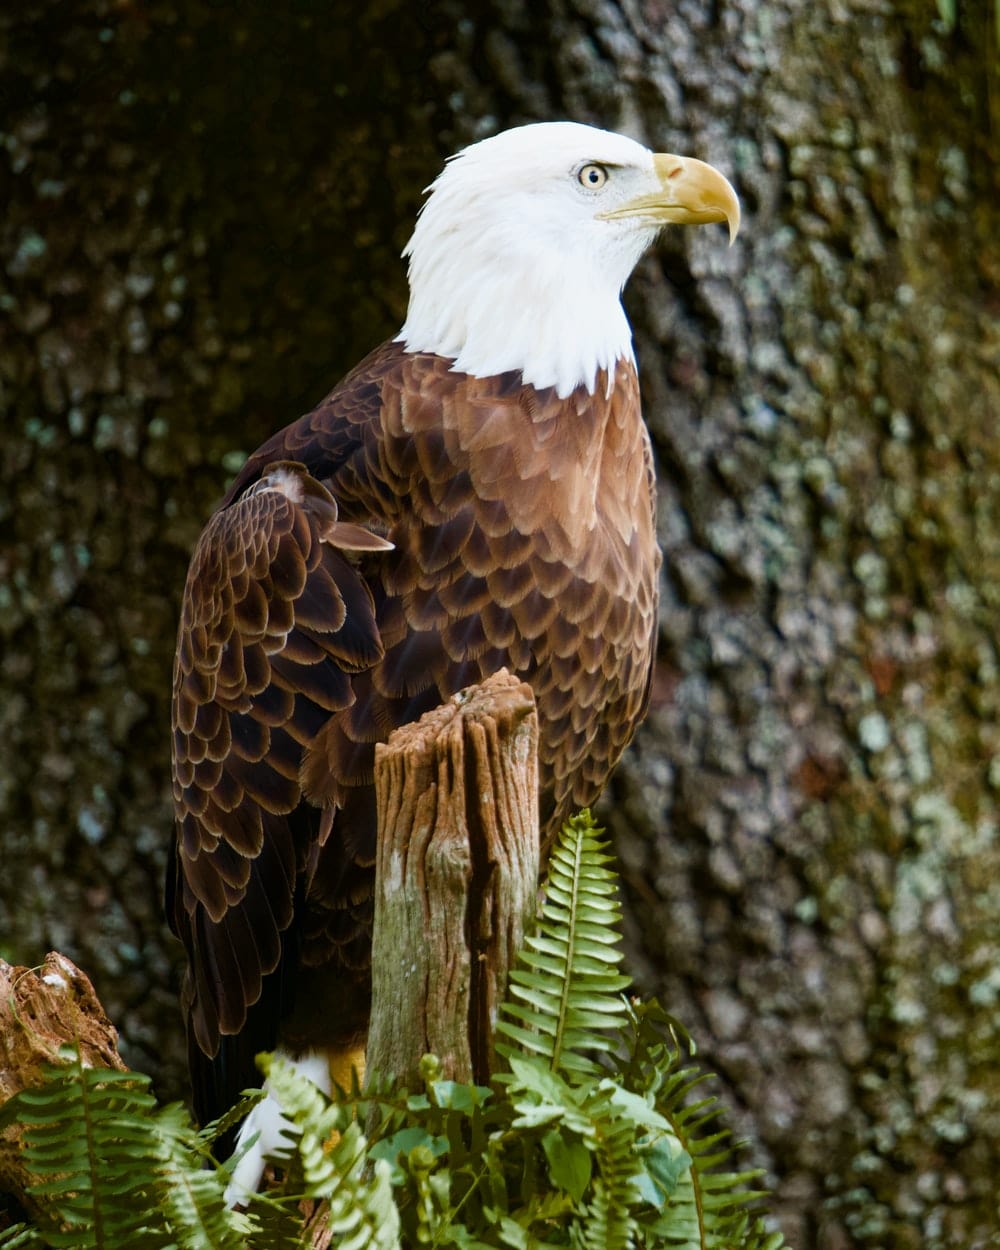 Cross Stitch | Bald Eagle - Brown And White Eagle On Brown Tree Branch - Cross Stitched